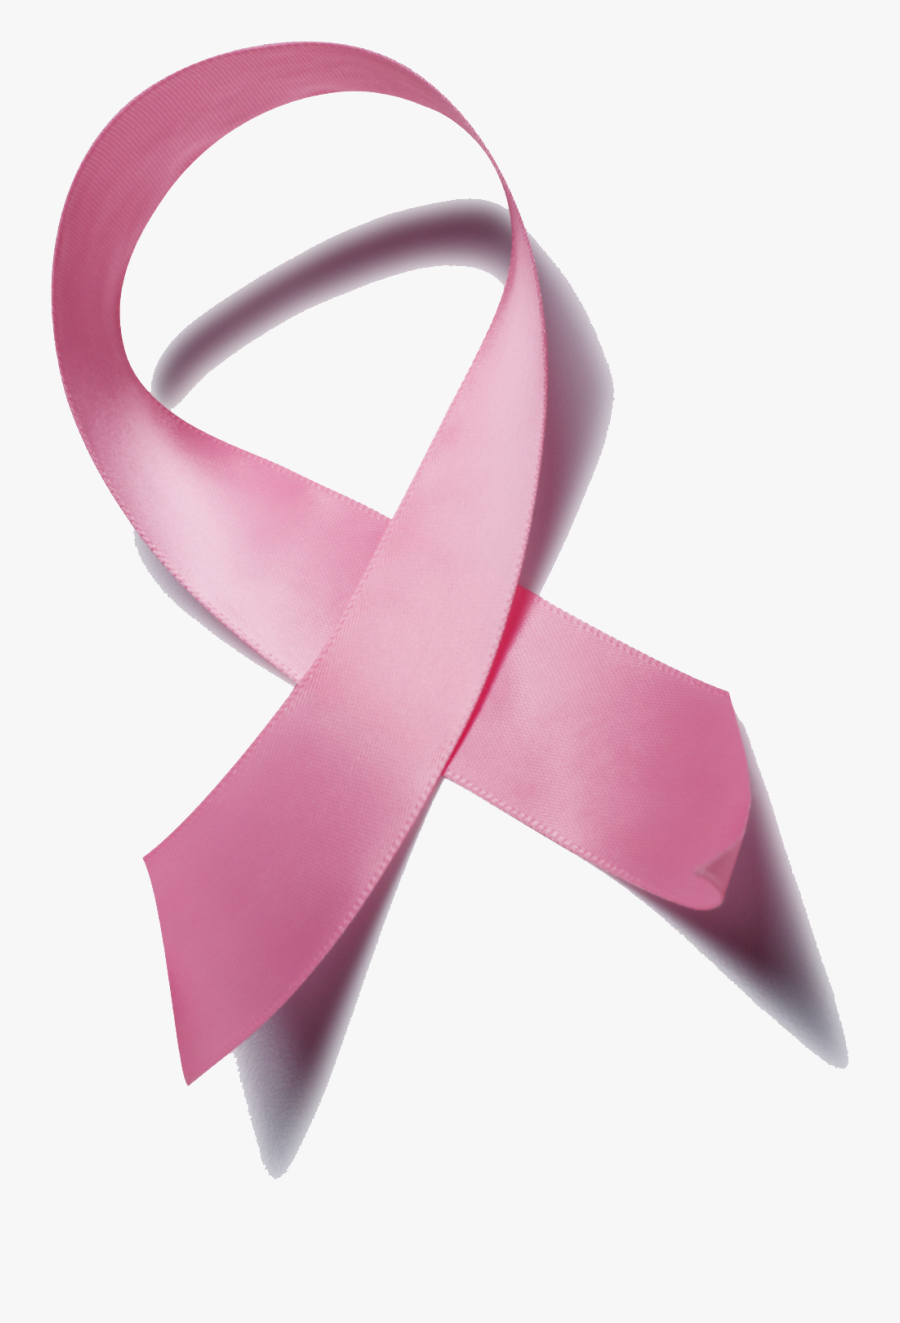 Breast Cancer Ribbon Png Clipart - Pink Ribbon Png Cancer, Transparent Clipart